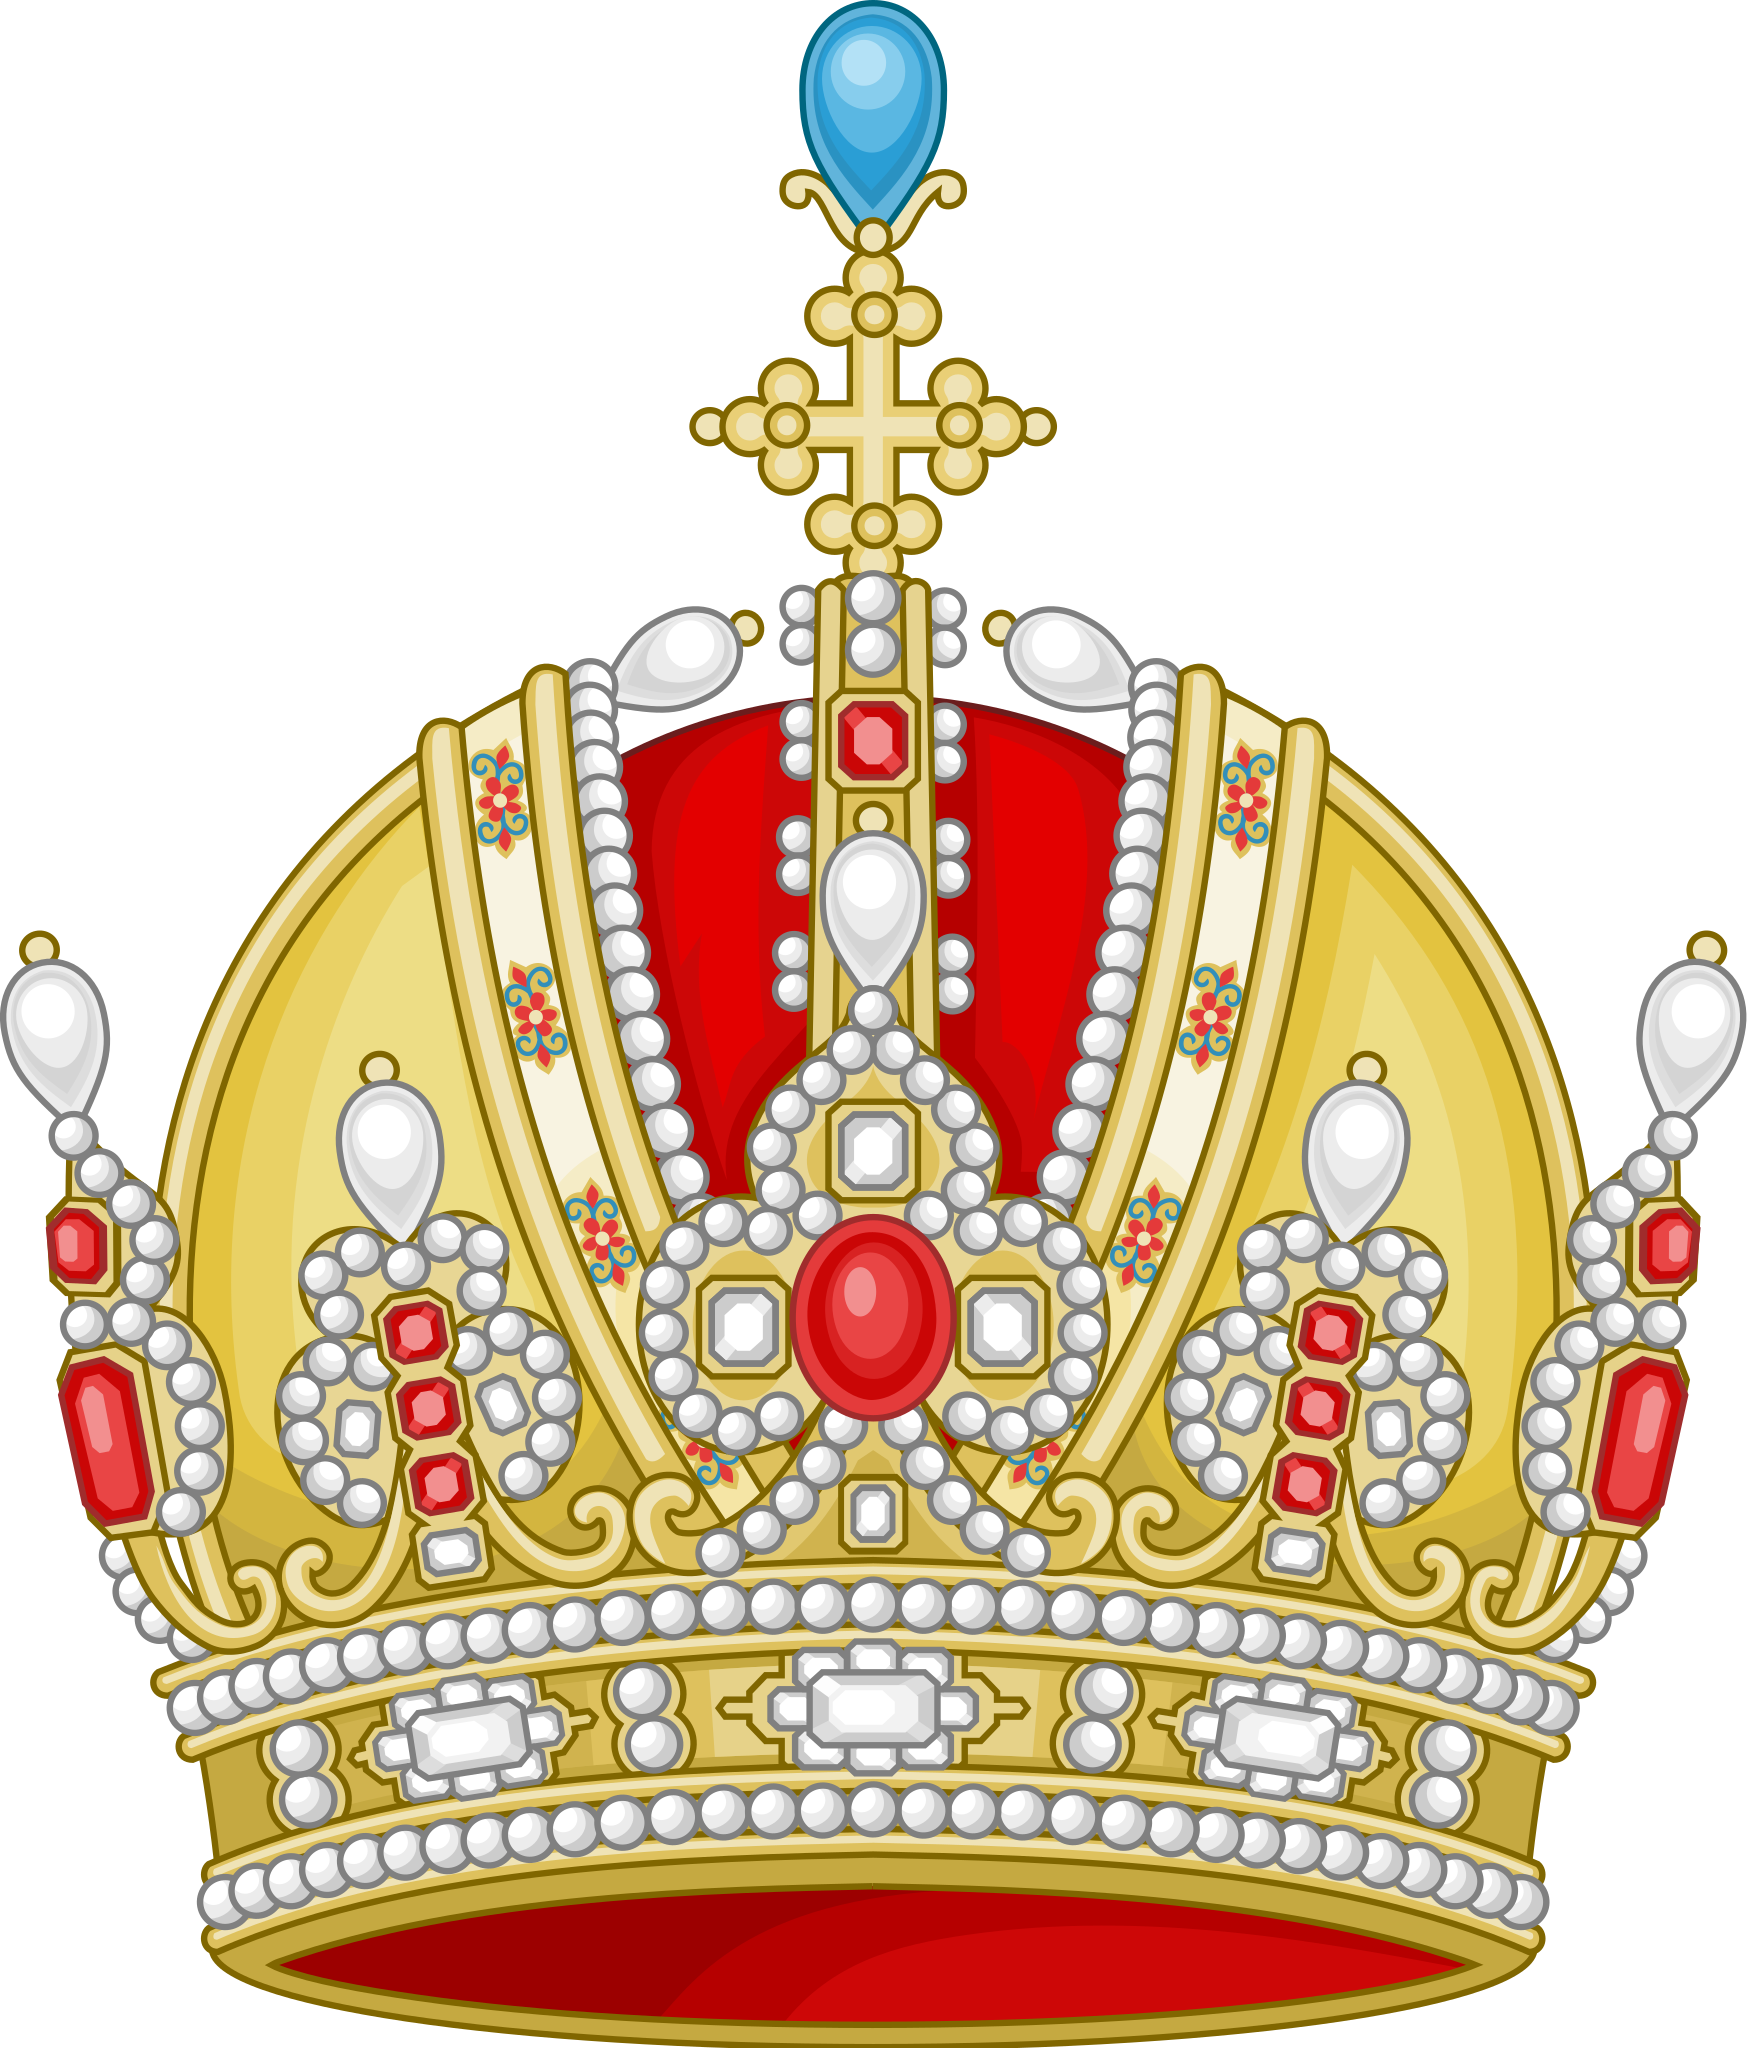 Download File Imperial Crown Of Austria Heraldry Svg Wikimedia Commons